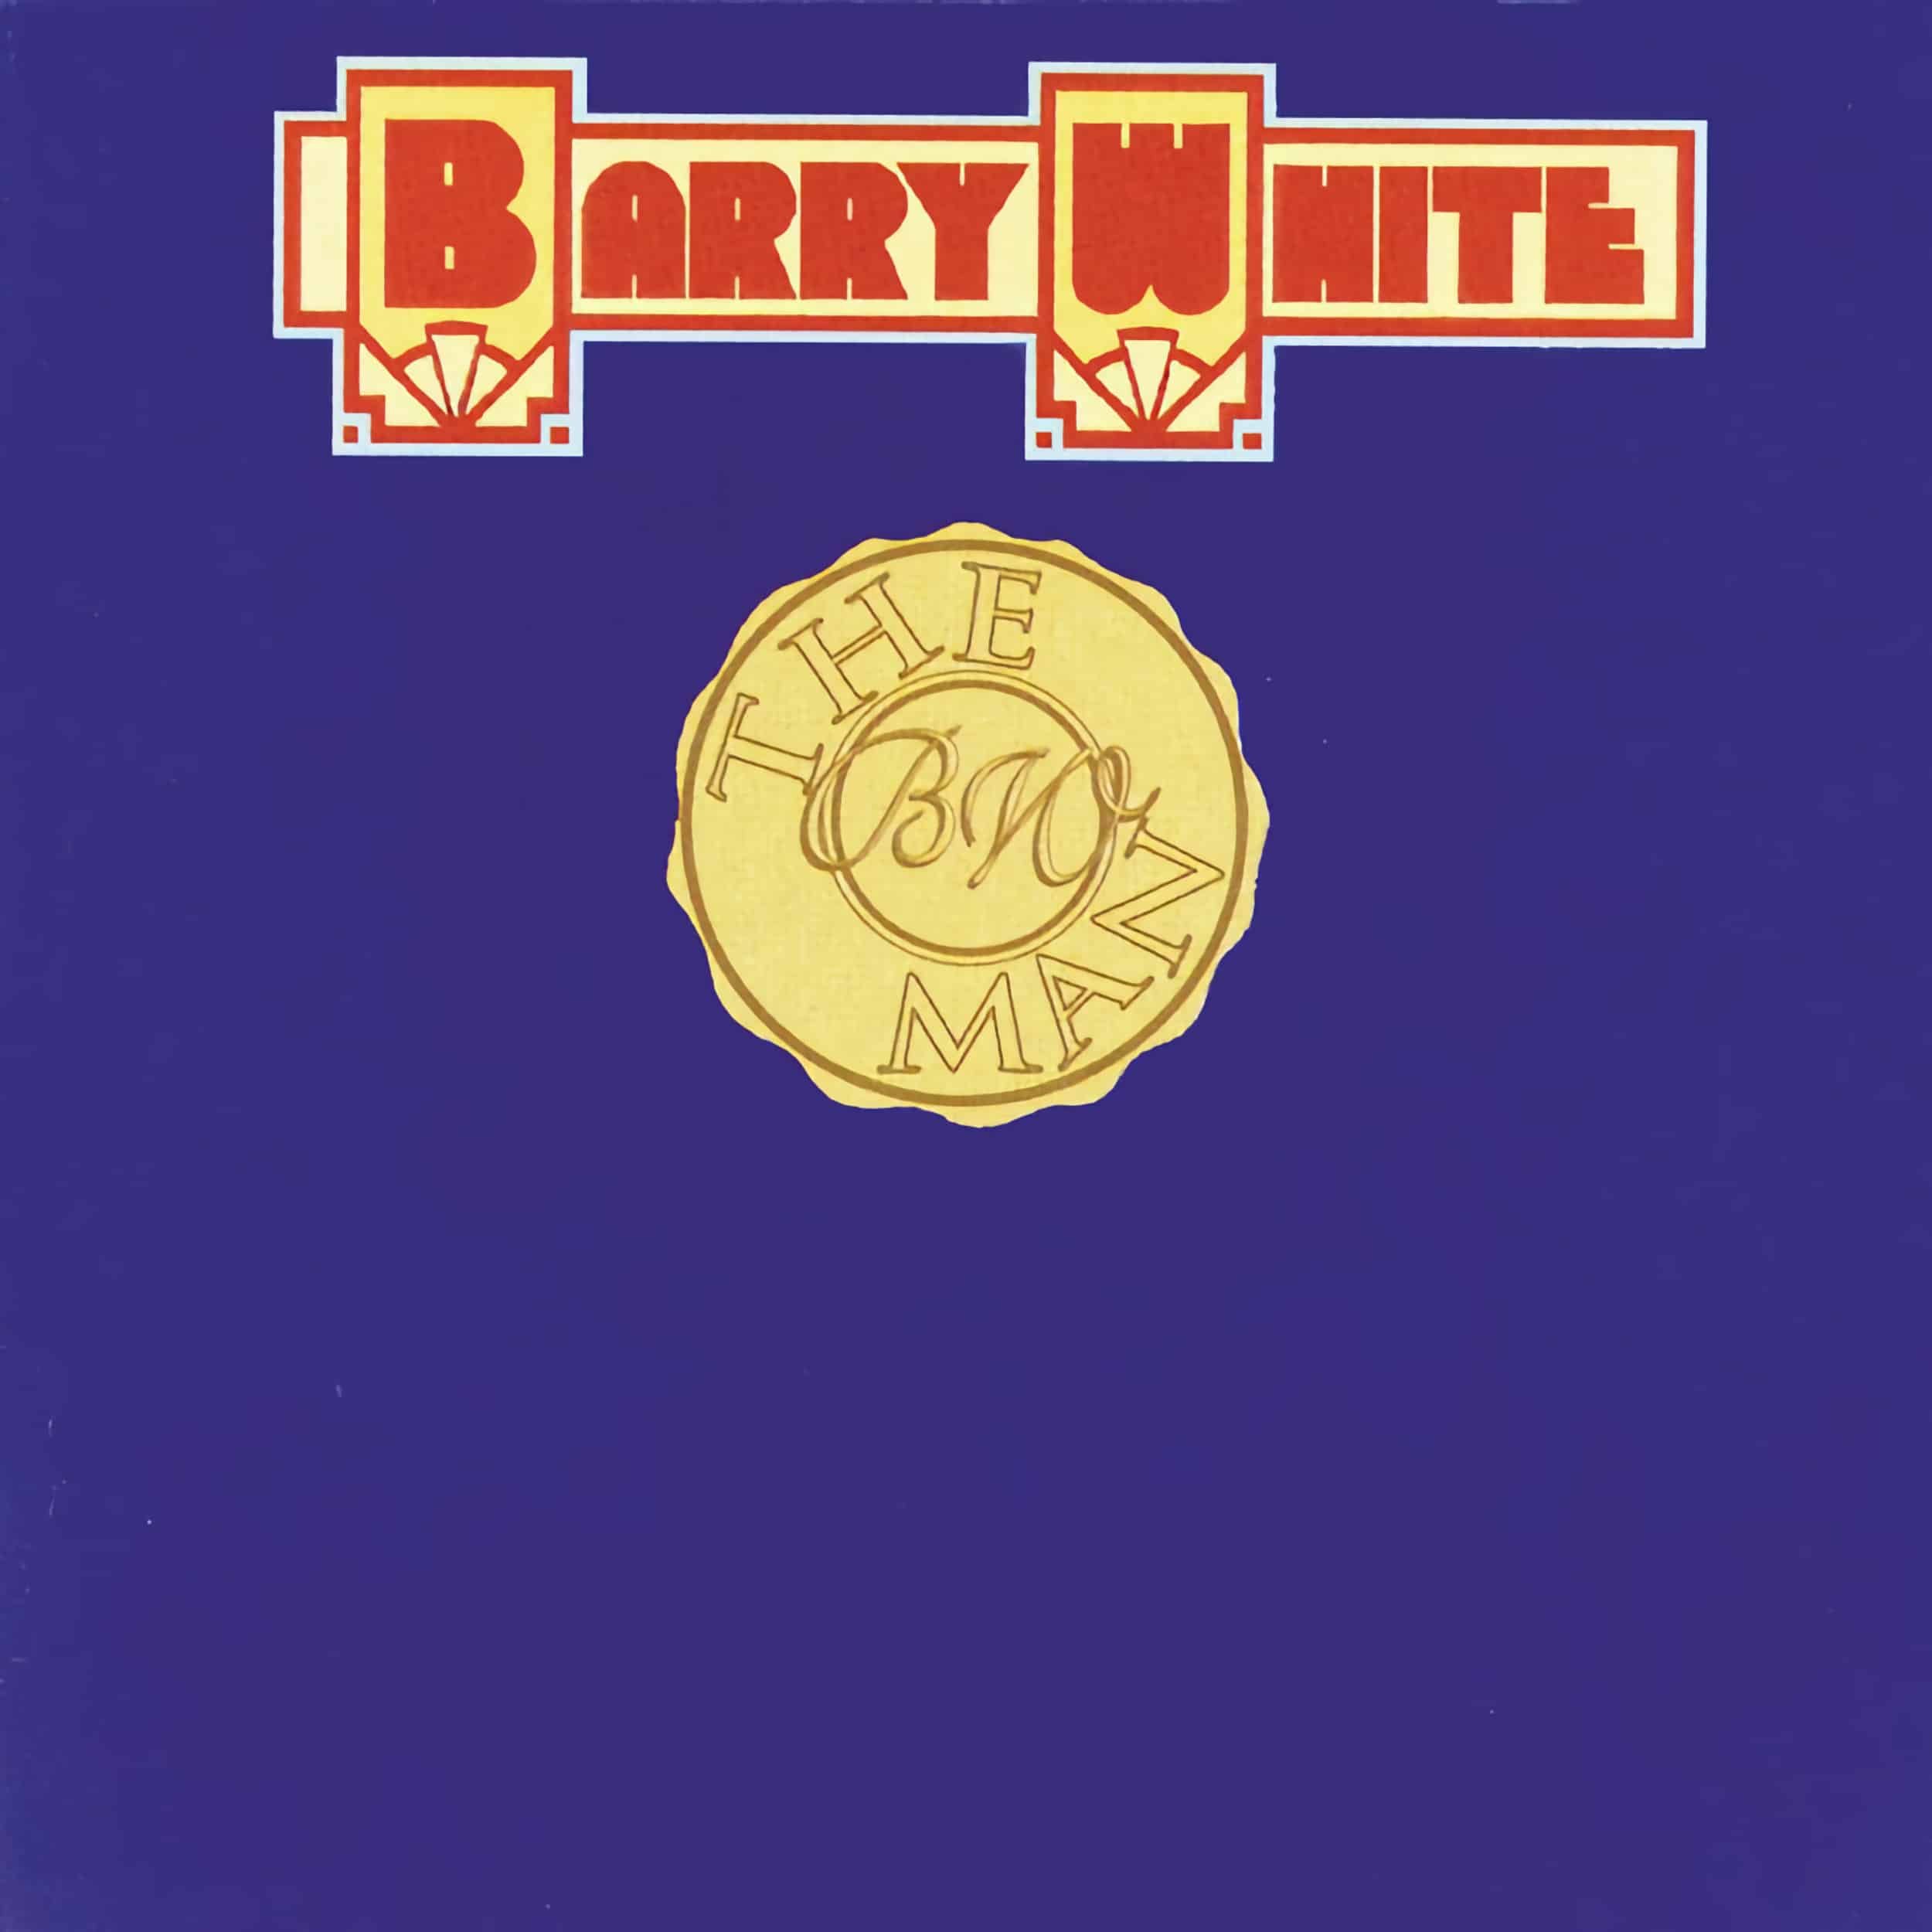 Barry White – The Man